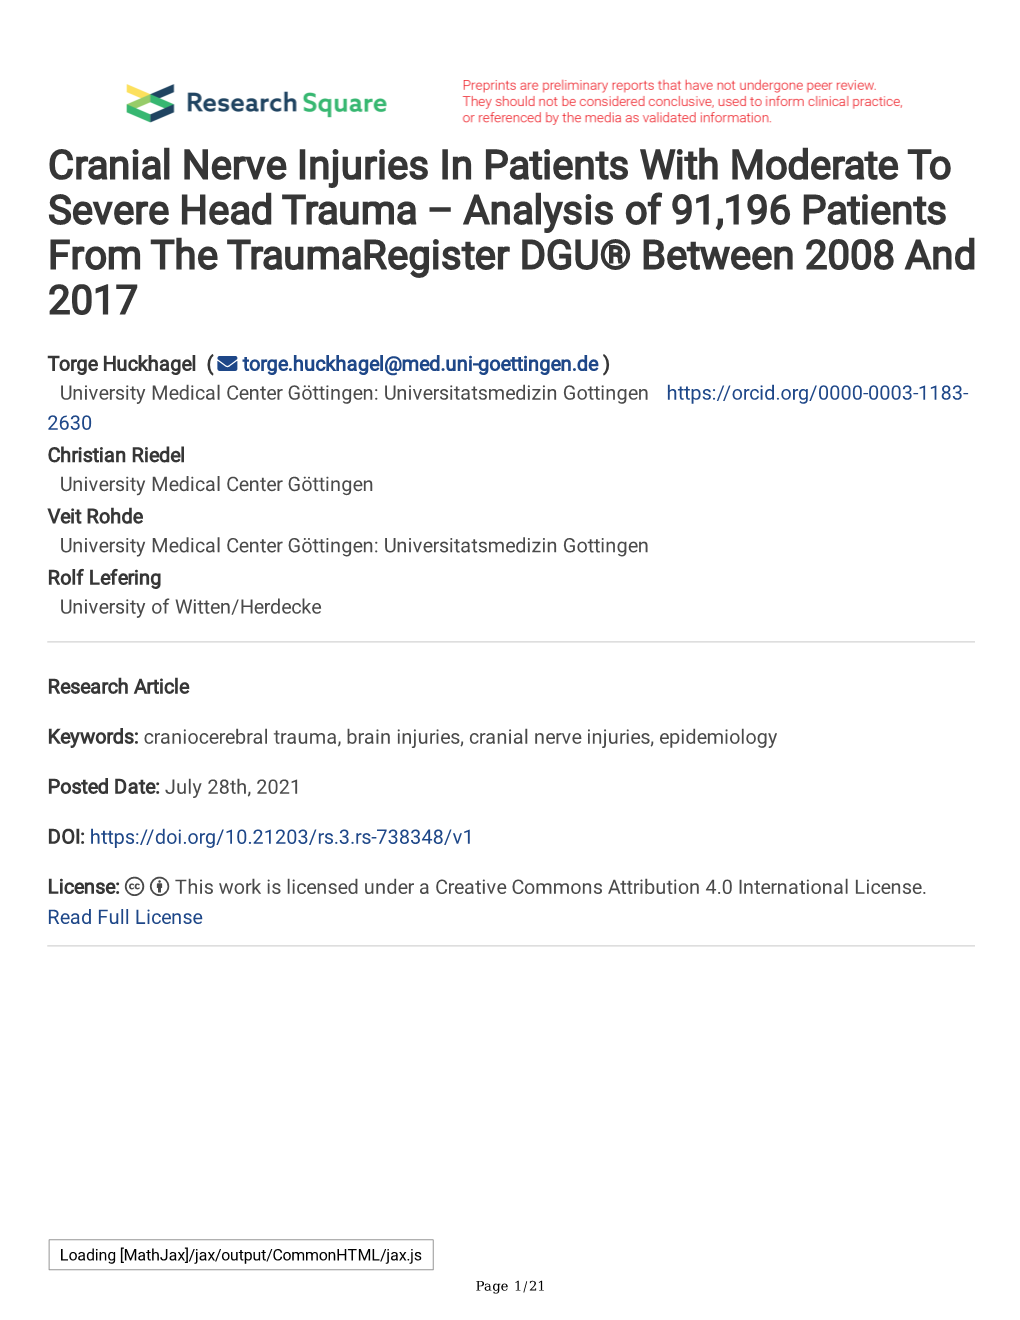 Cranial Nerve Injuries in Patients with Moderate to Severe Head Trauma – Analysis of 91,196 Patients from the Traumaregister DGU® Between 2008 and 2017